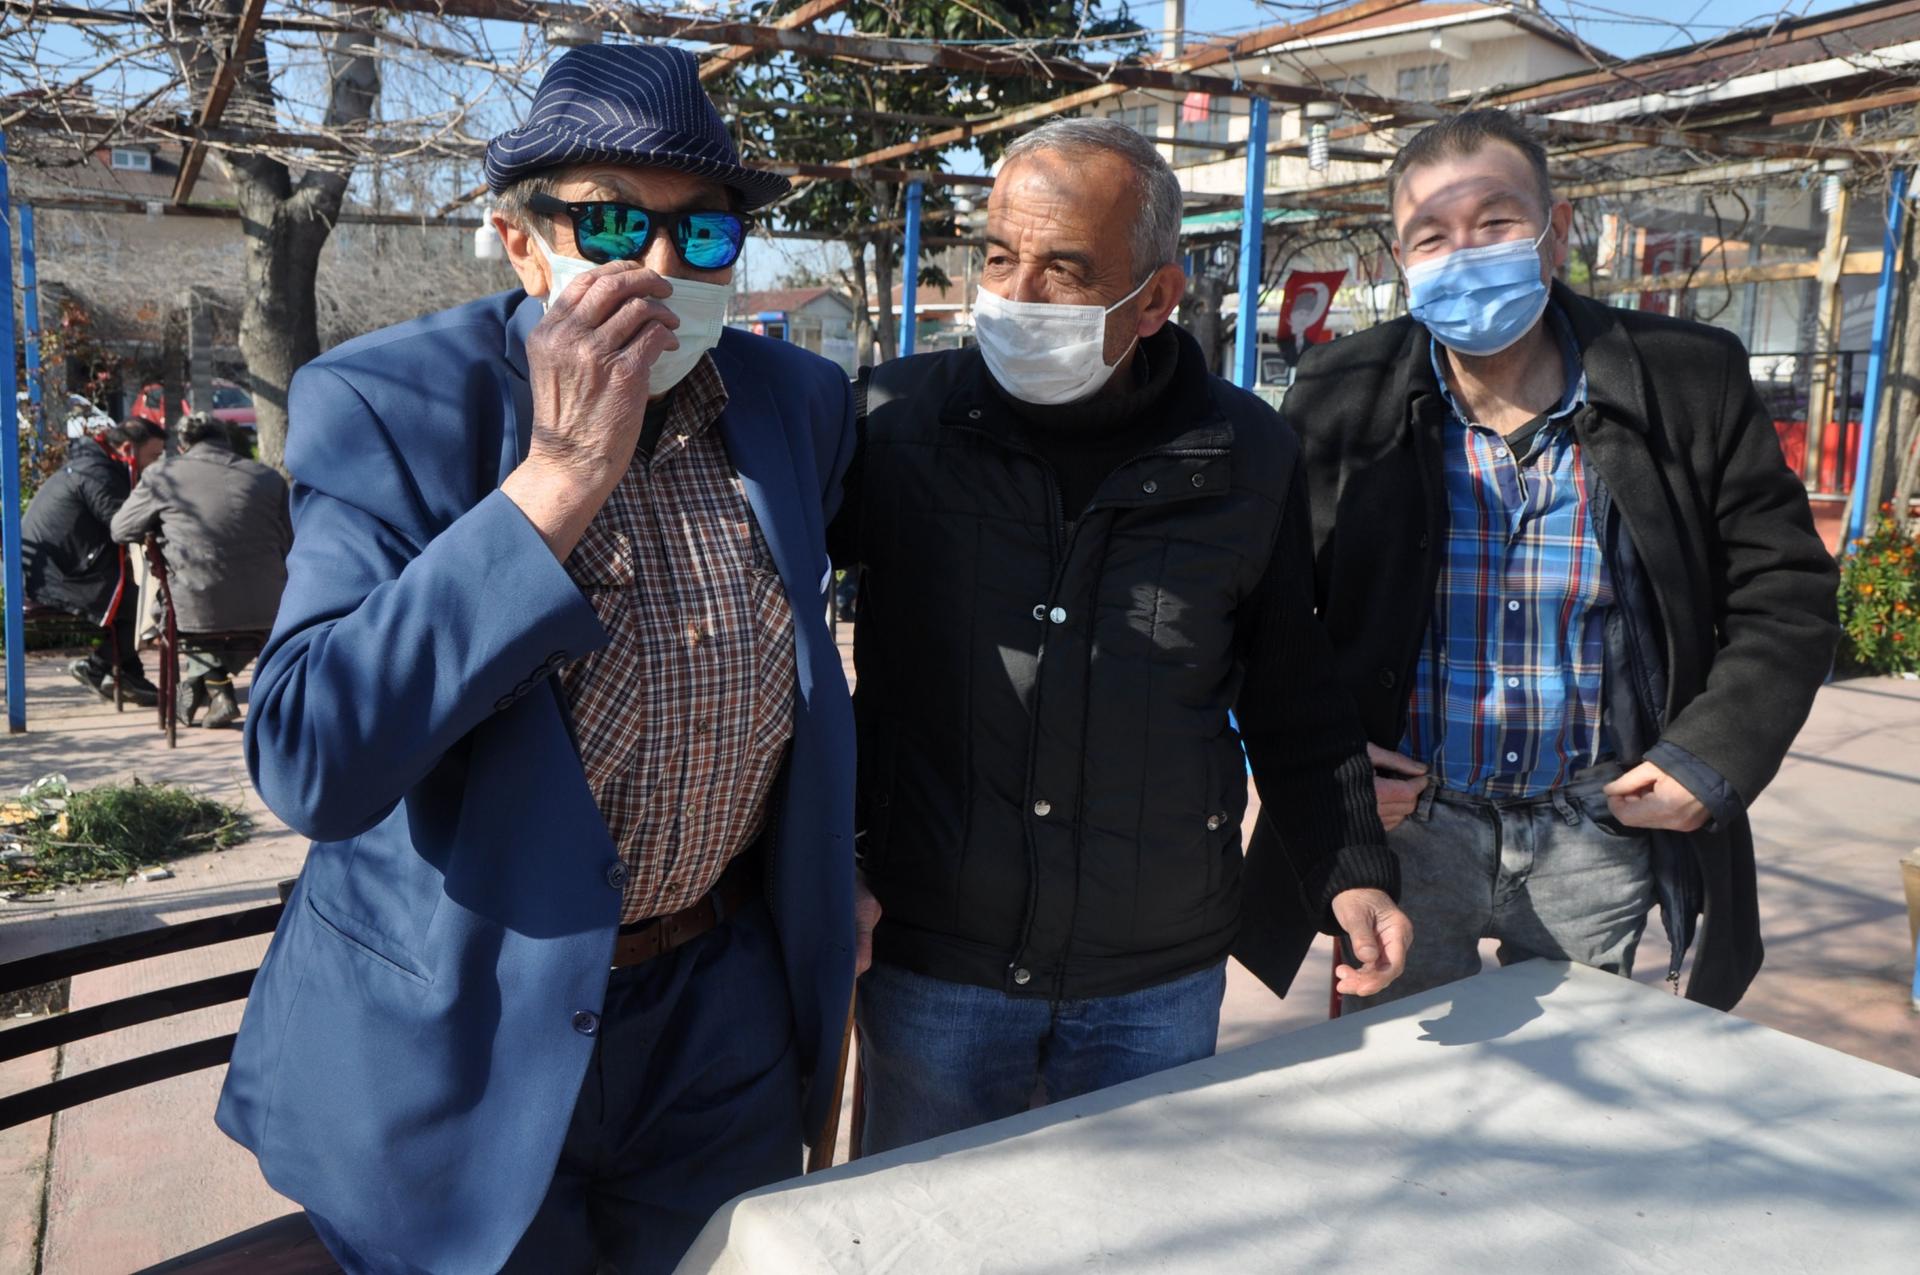 Three older men wearing blue and black clothing and face masks pose together in an outdoor tea garden. 